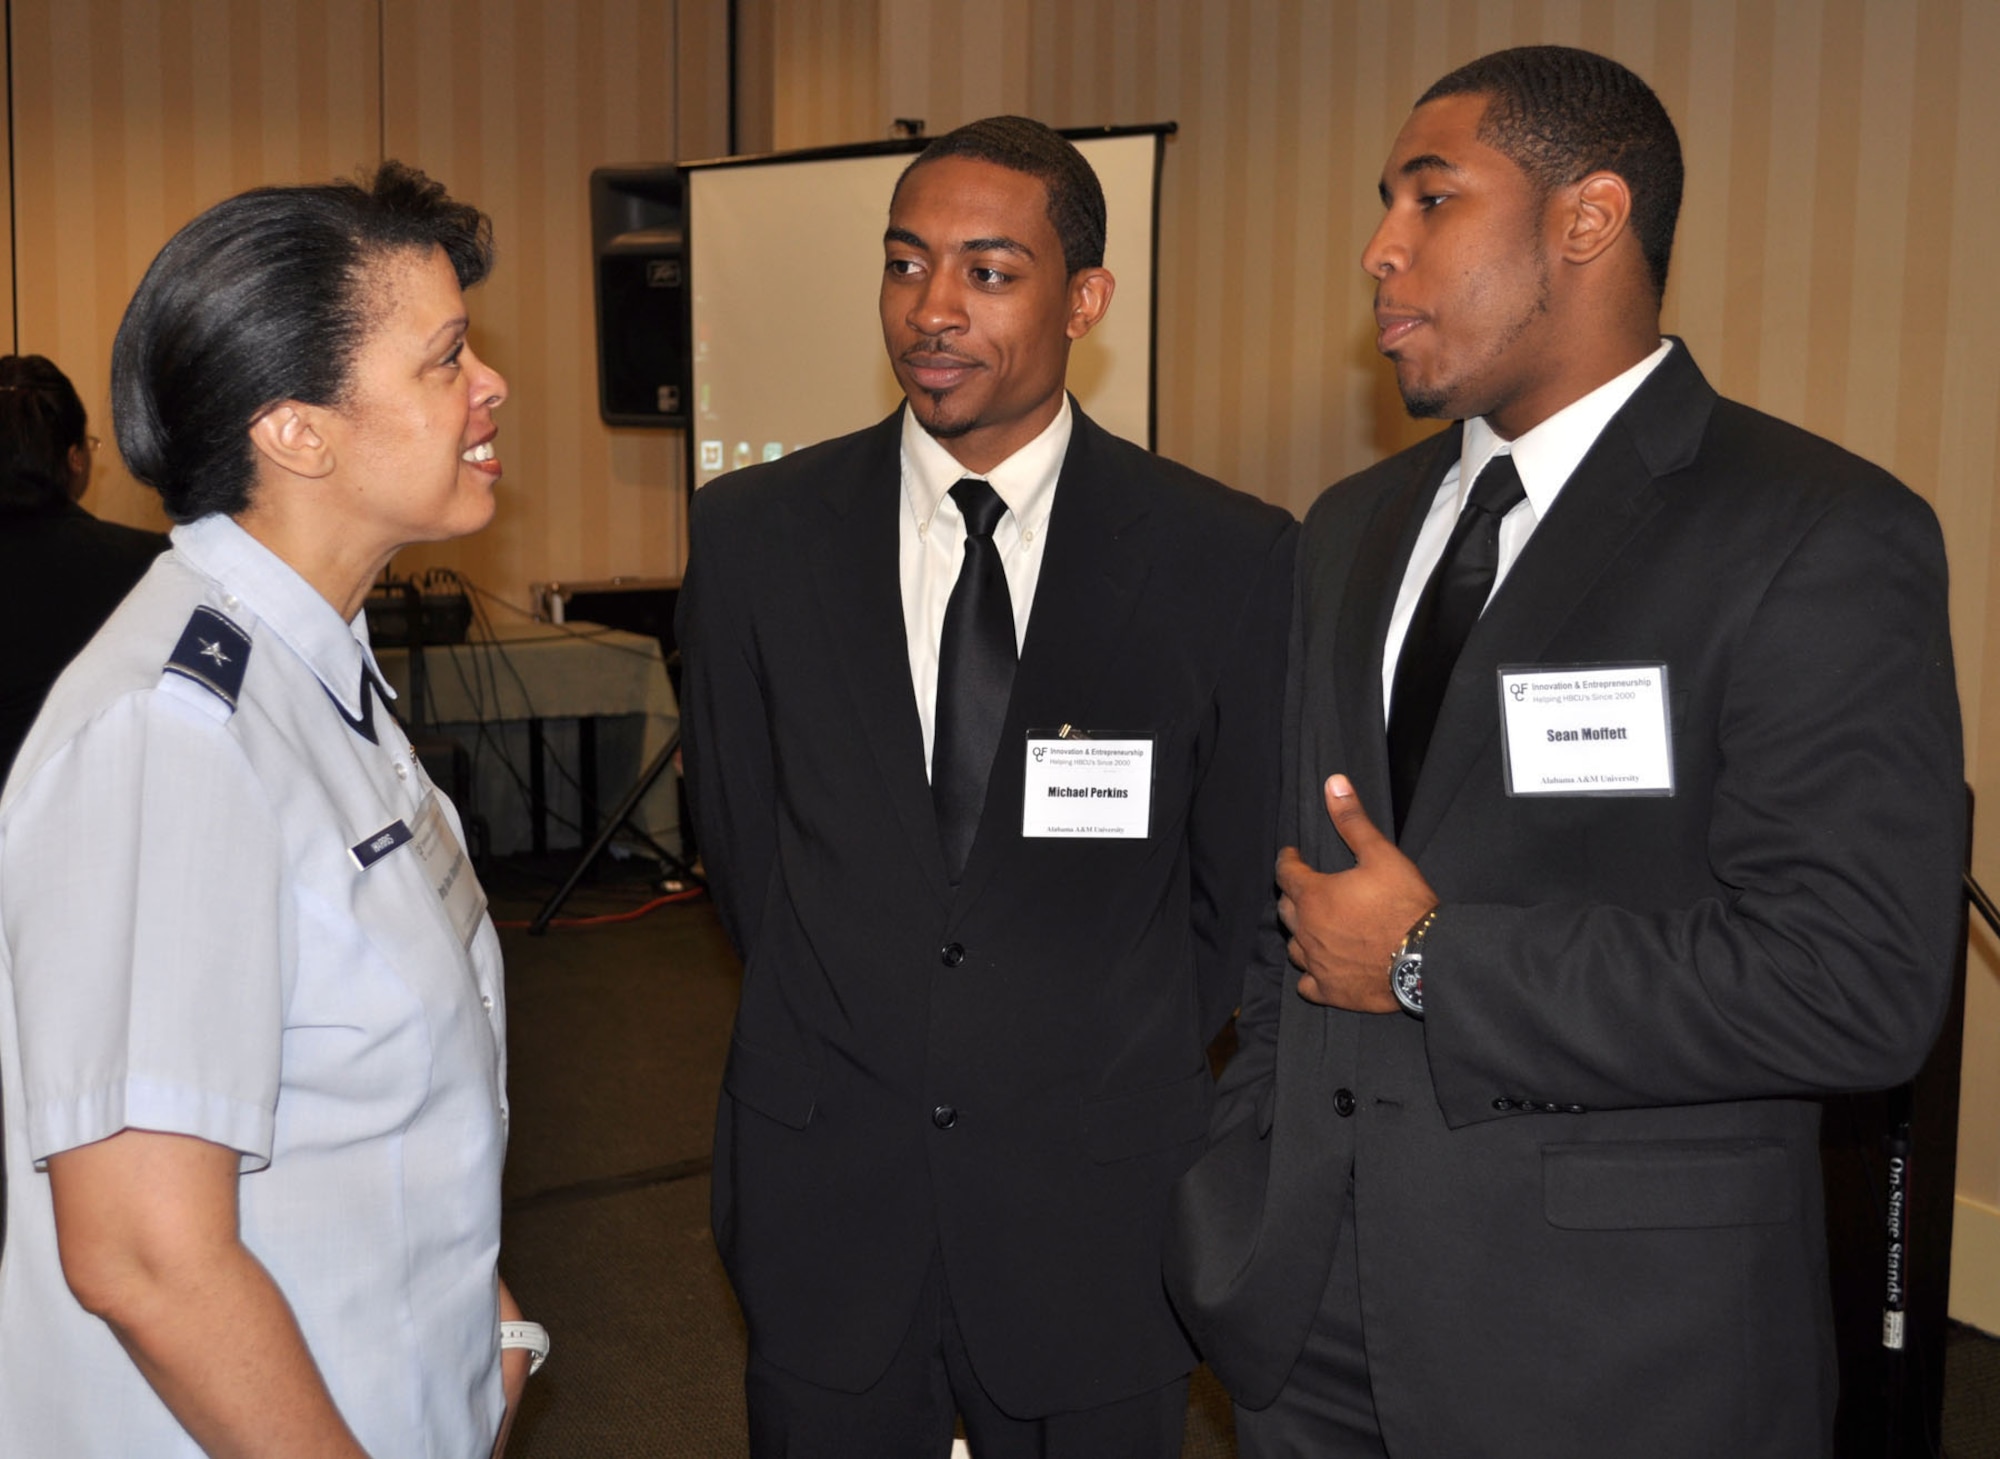 Brig. Gen. Stacey Harris, mobilization assistant to the Commander, U.S. Africa Command, talks with Michael Perkins and Sean Moffett, Alabama A & M University, during the Innovation and Entrepreneurship Challenge in Atlanta April 15, 2011. General Harris served as a judge during the eleventh annual event and used the opportunity to get to know students after they presented a business plan to demonstrate their entrepreneurial skills. 